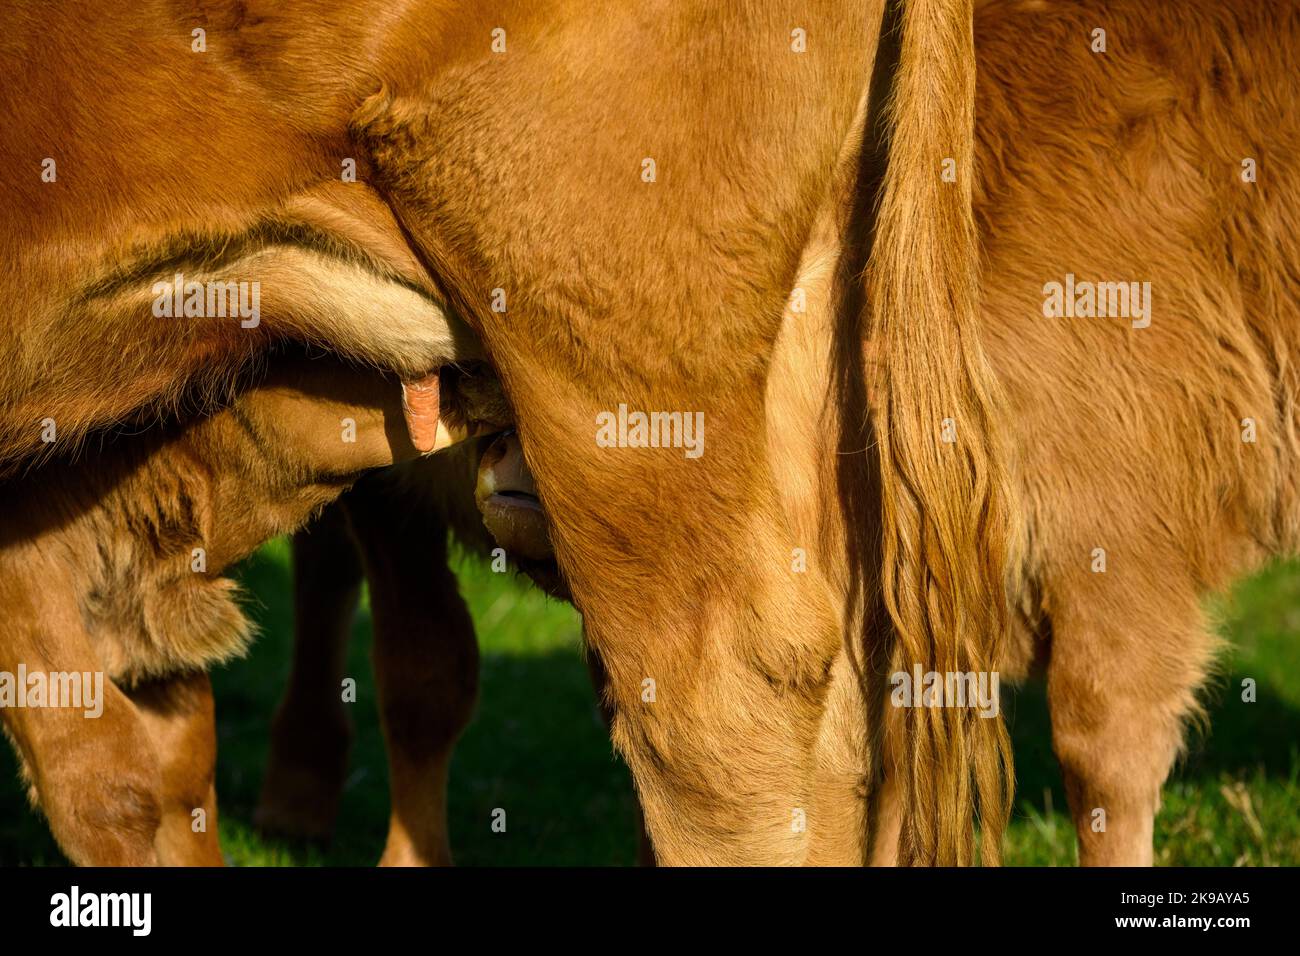 Sunlit brown cow & 2 two small newborn calves standing in farm field (hungry thirsty youngsters, mother's milk, close-up) - Yorkshire, England, UK. Stock Photo